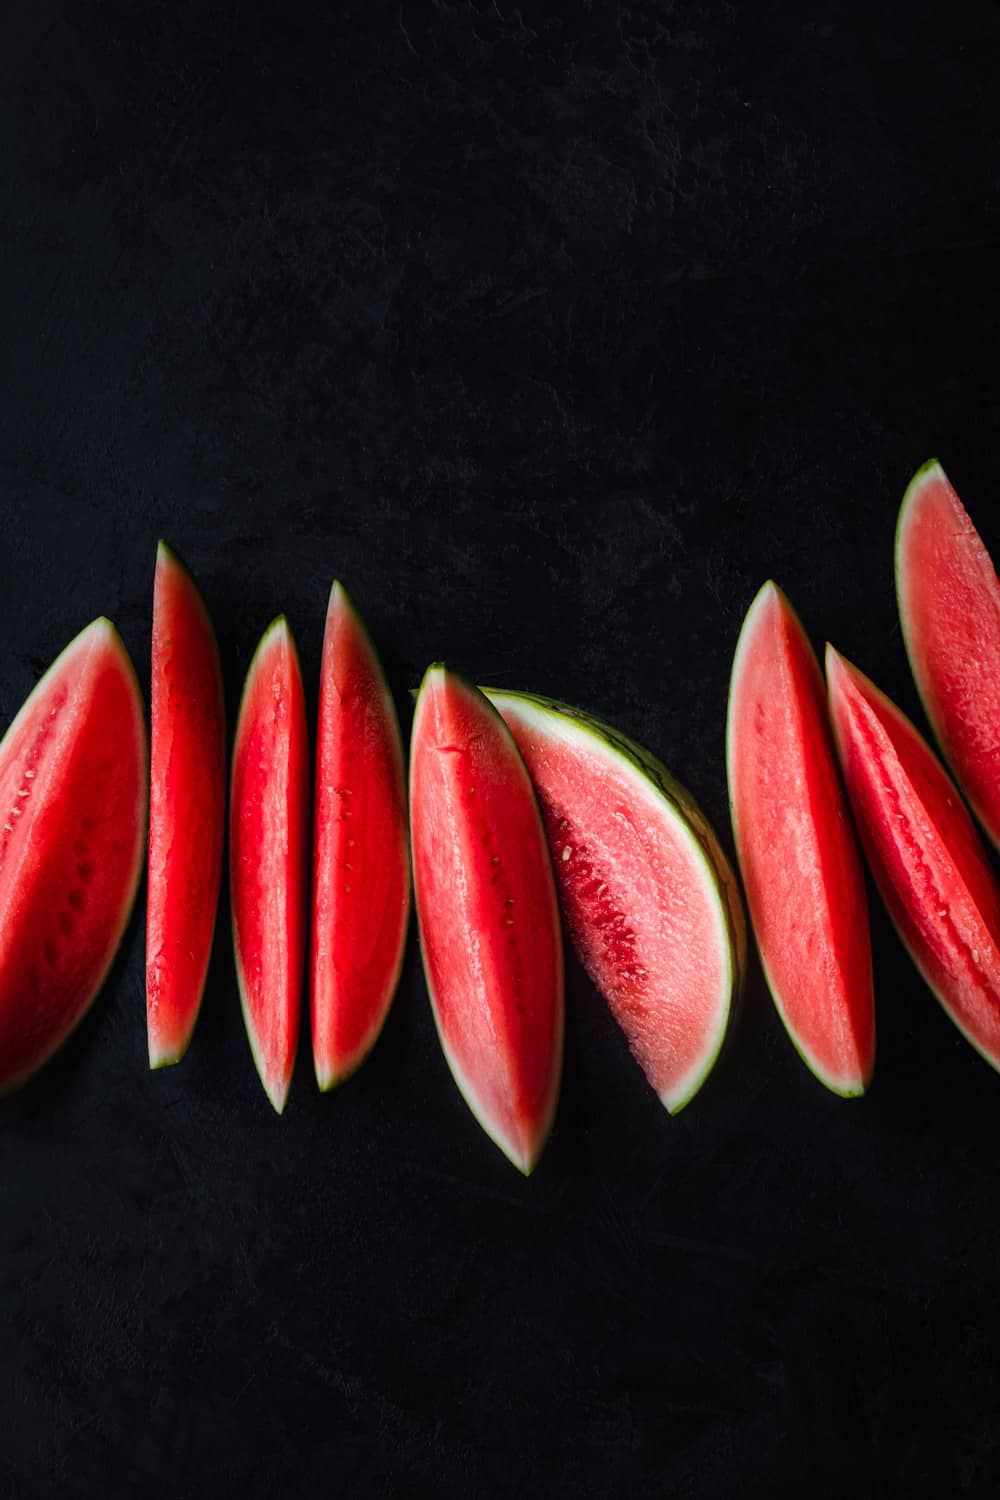 red watermelon slices on a black background